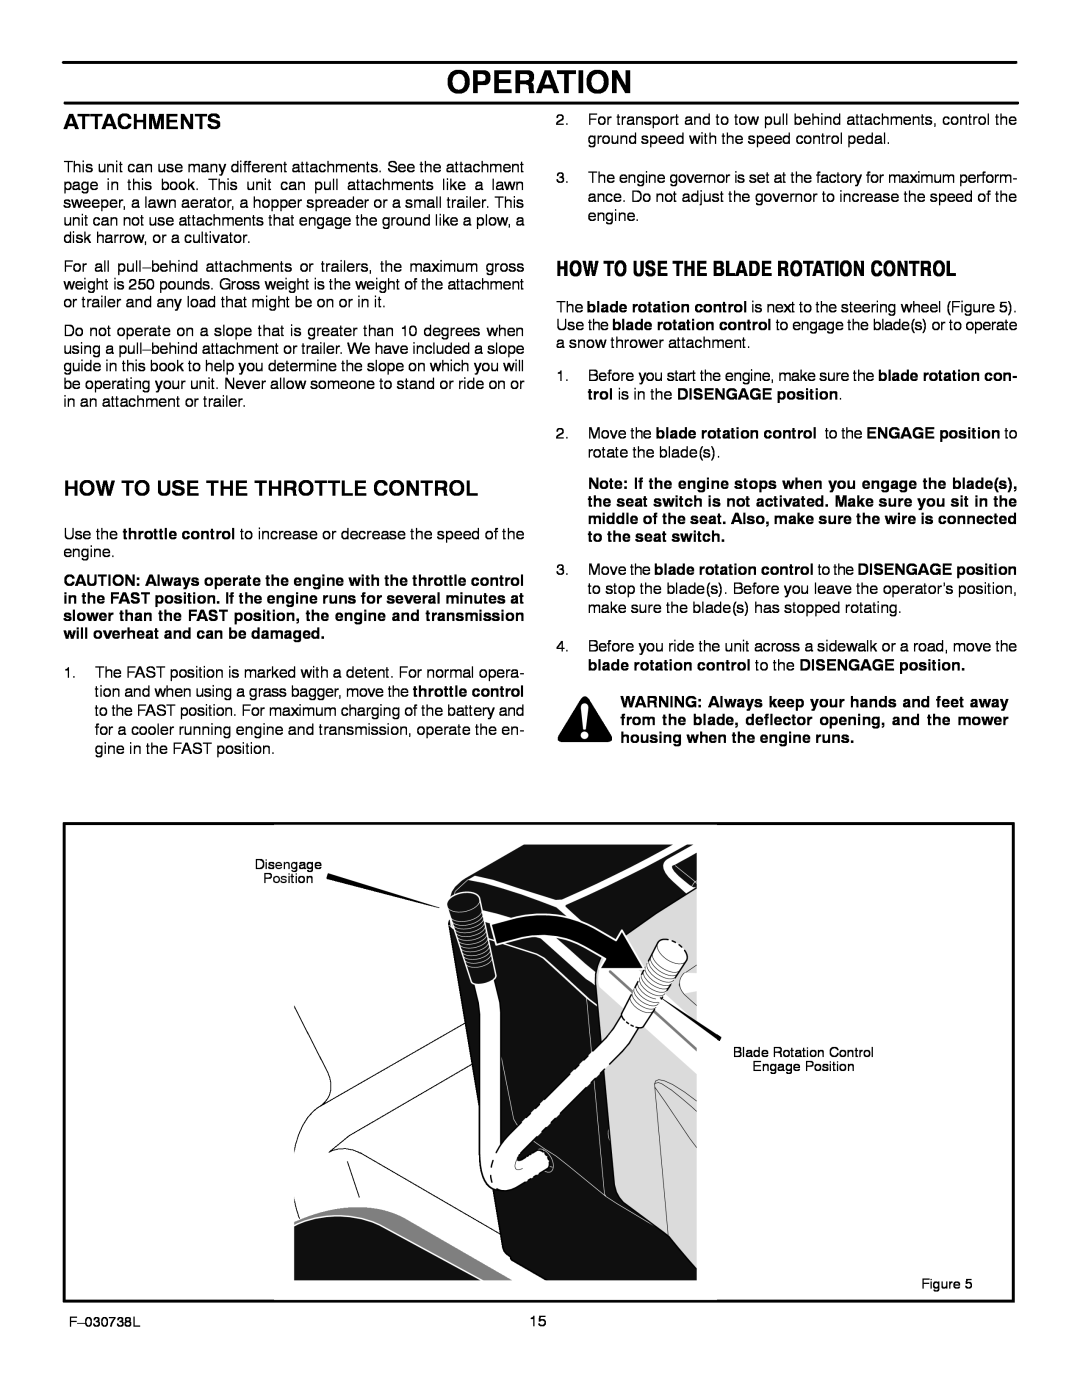 Murray 425603x99A manual Operation, Attachments, How To Use The Throttle Control, How To Use The Blade Rotation Control 